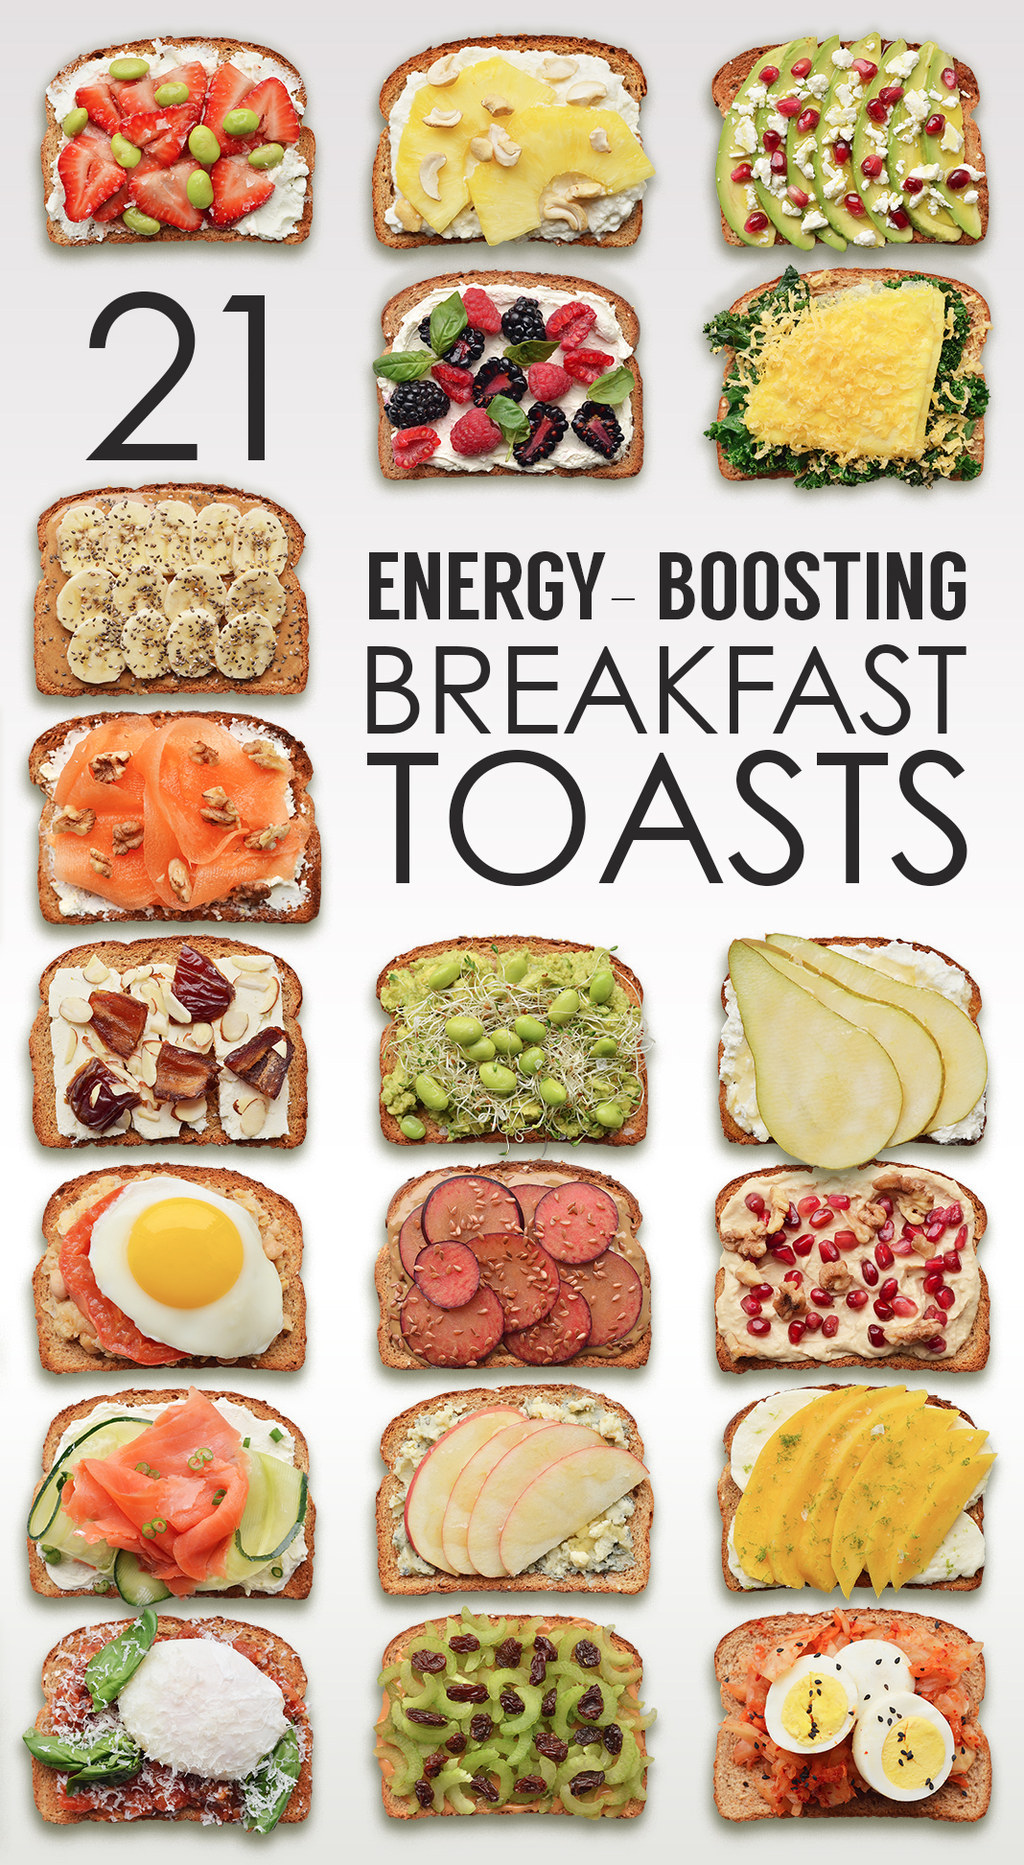 21 Ideas For Energy Boosting Breakfast Toasts